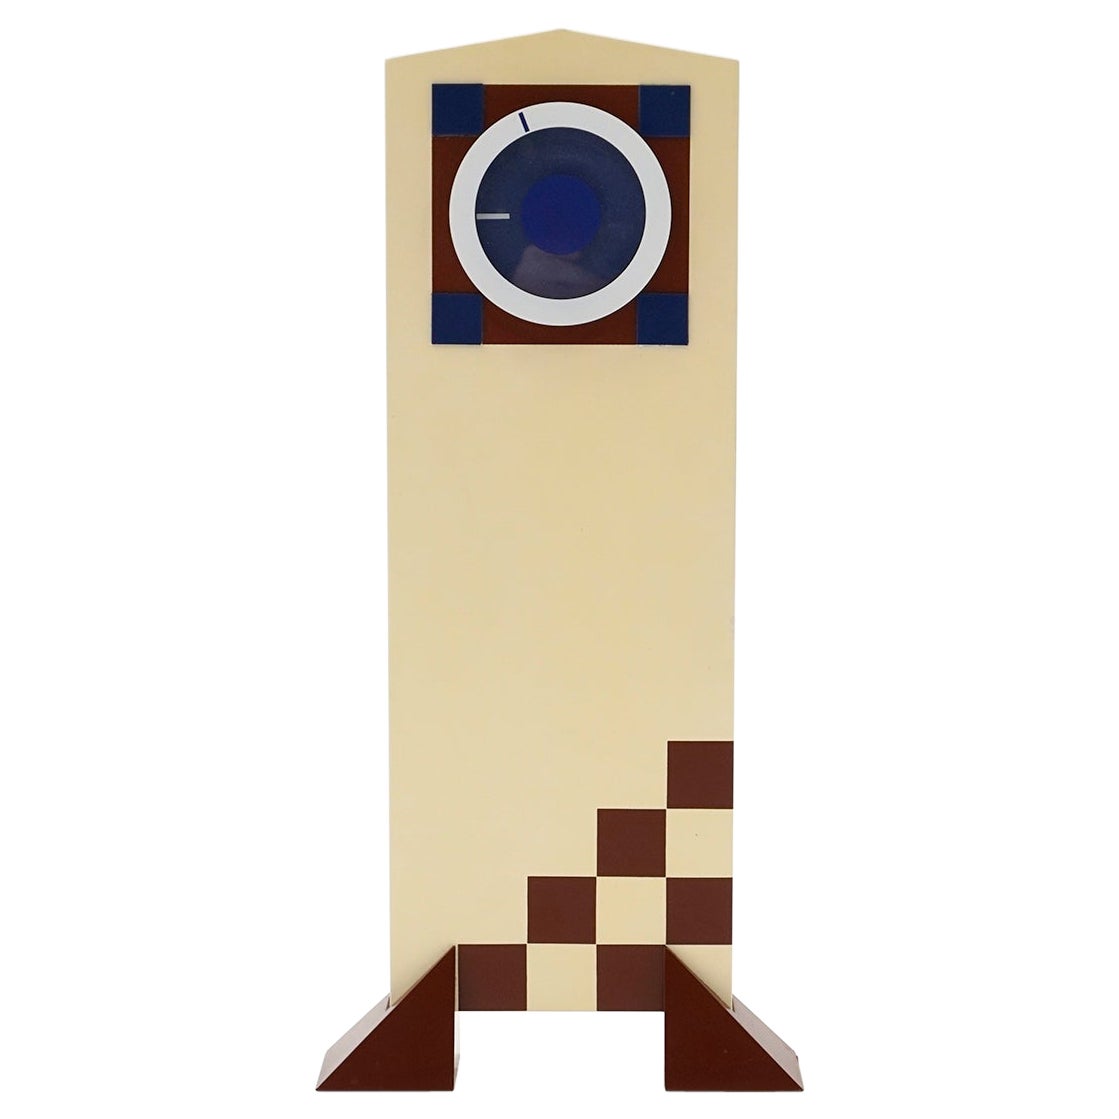 Checkerboard Table Clock, "Tempo 21" Tower 2 by George Nelson, 1984 For Sale